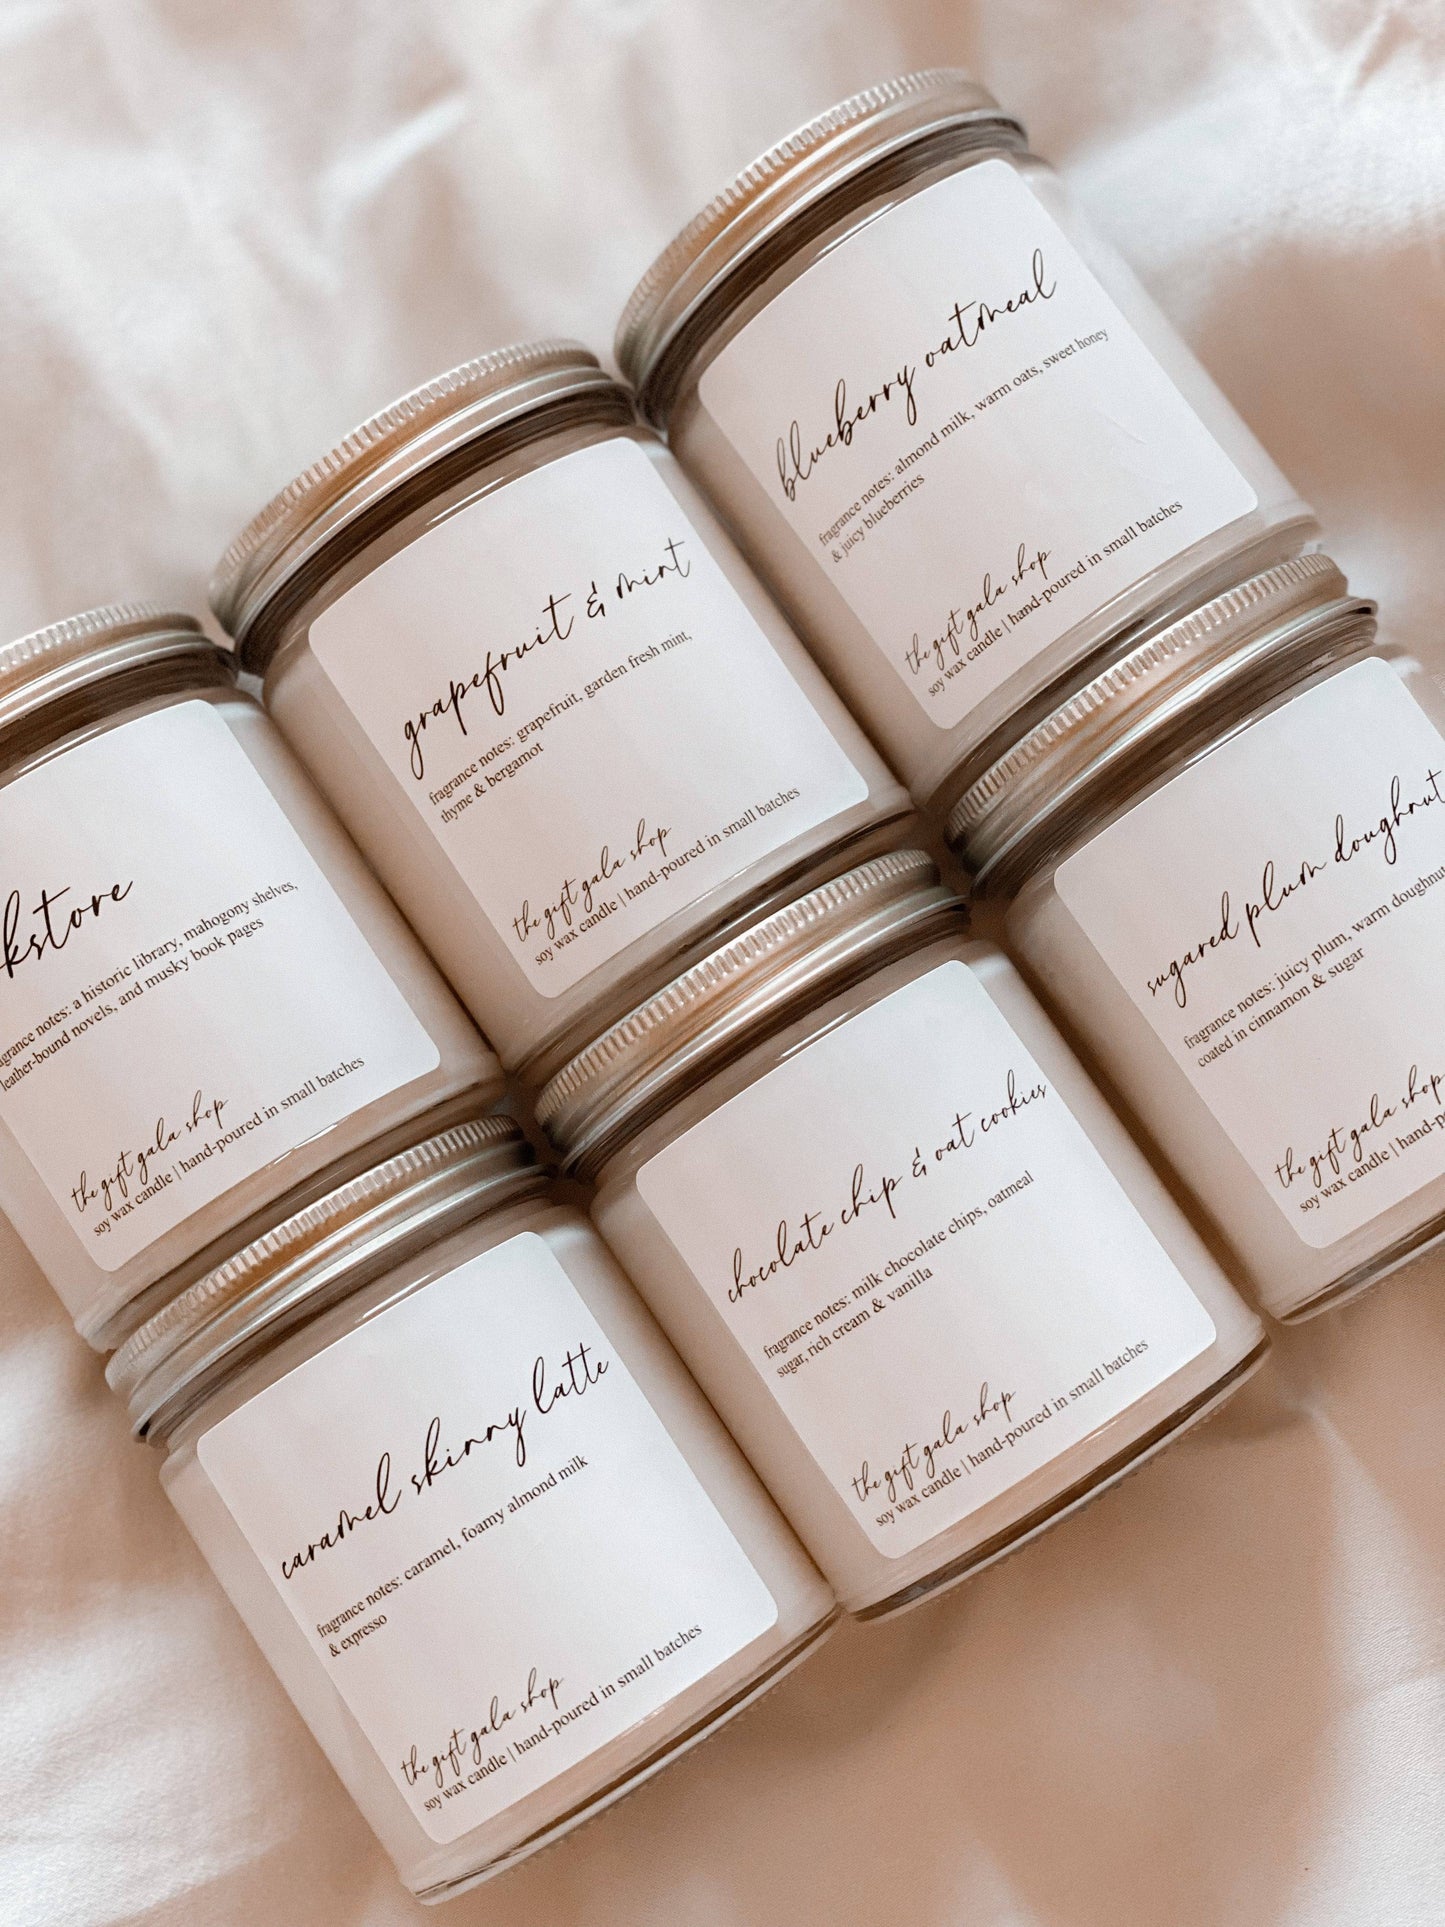 Spring Soy Candles | Hand Poured Candles Choose Scent Soy candle Thegiftgalashop 